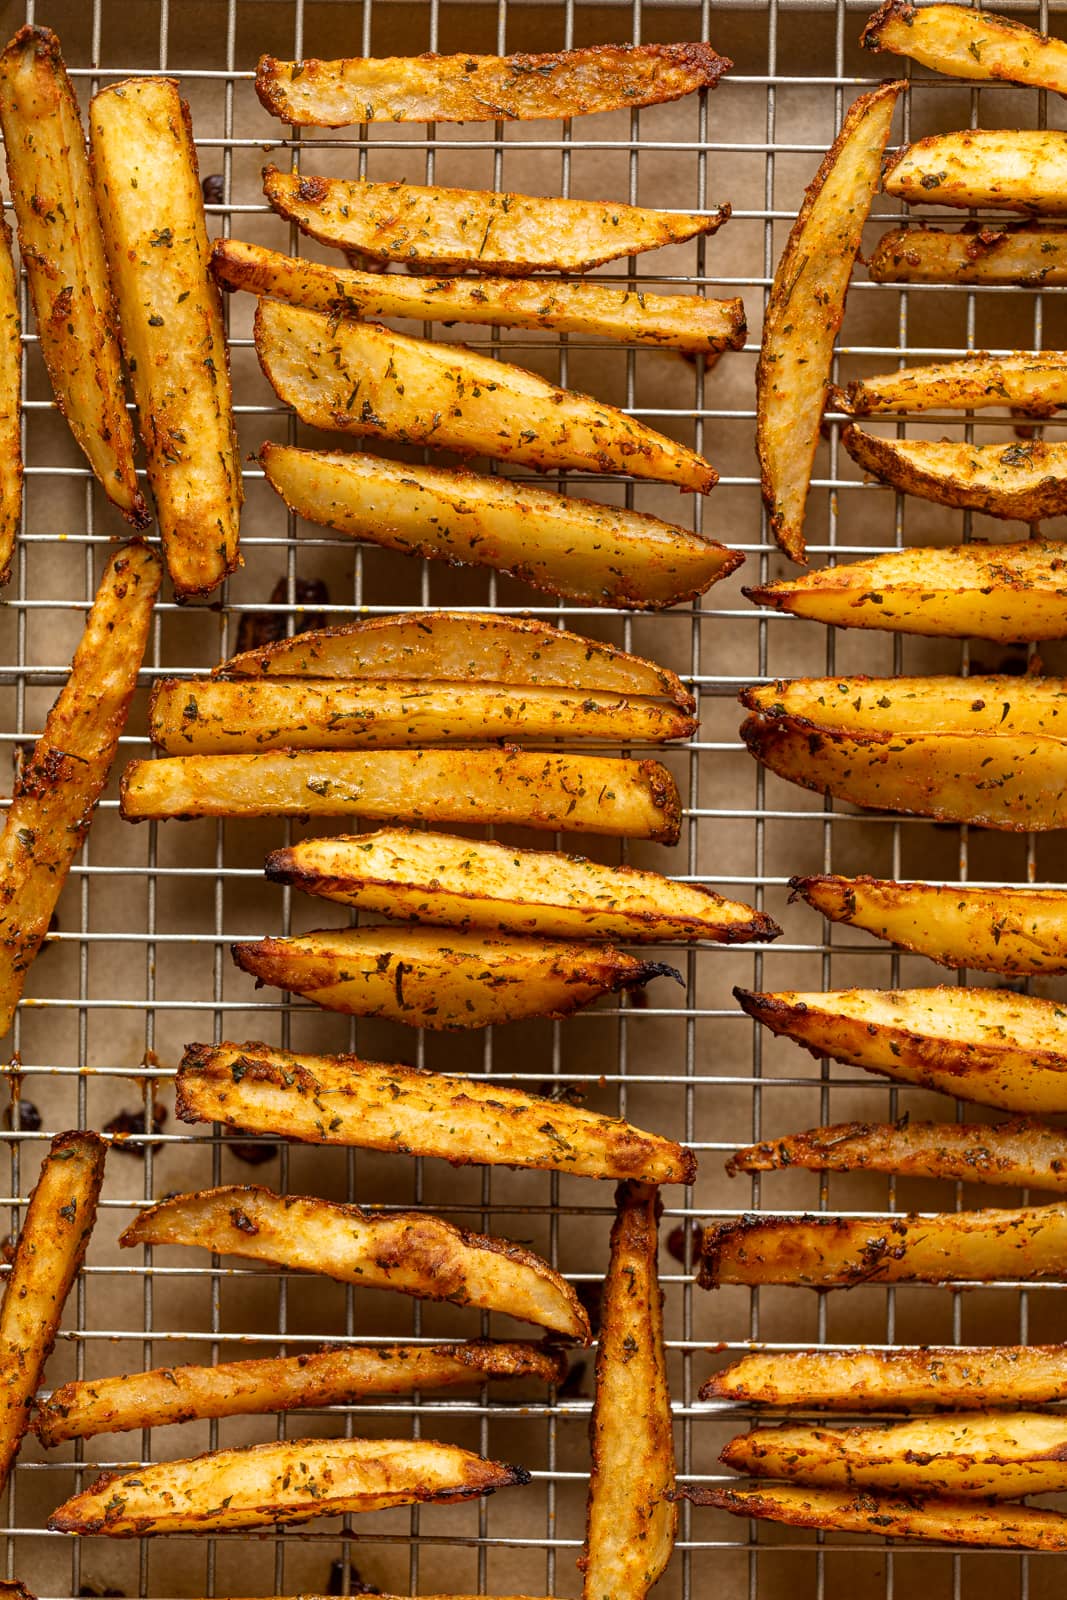 Crispy Baked French Fries [EASY Oven Baked French Fries]